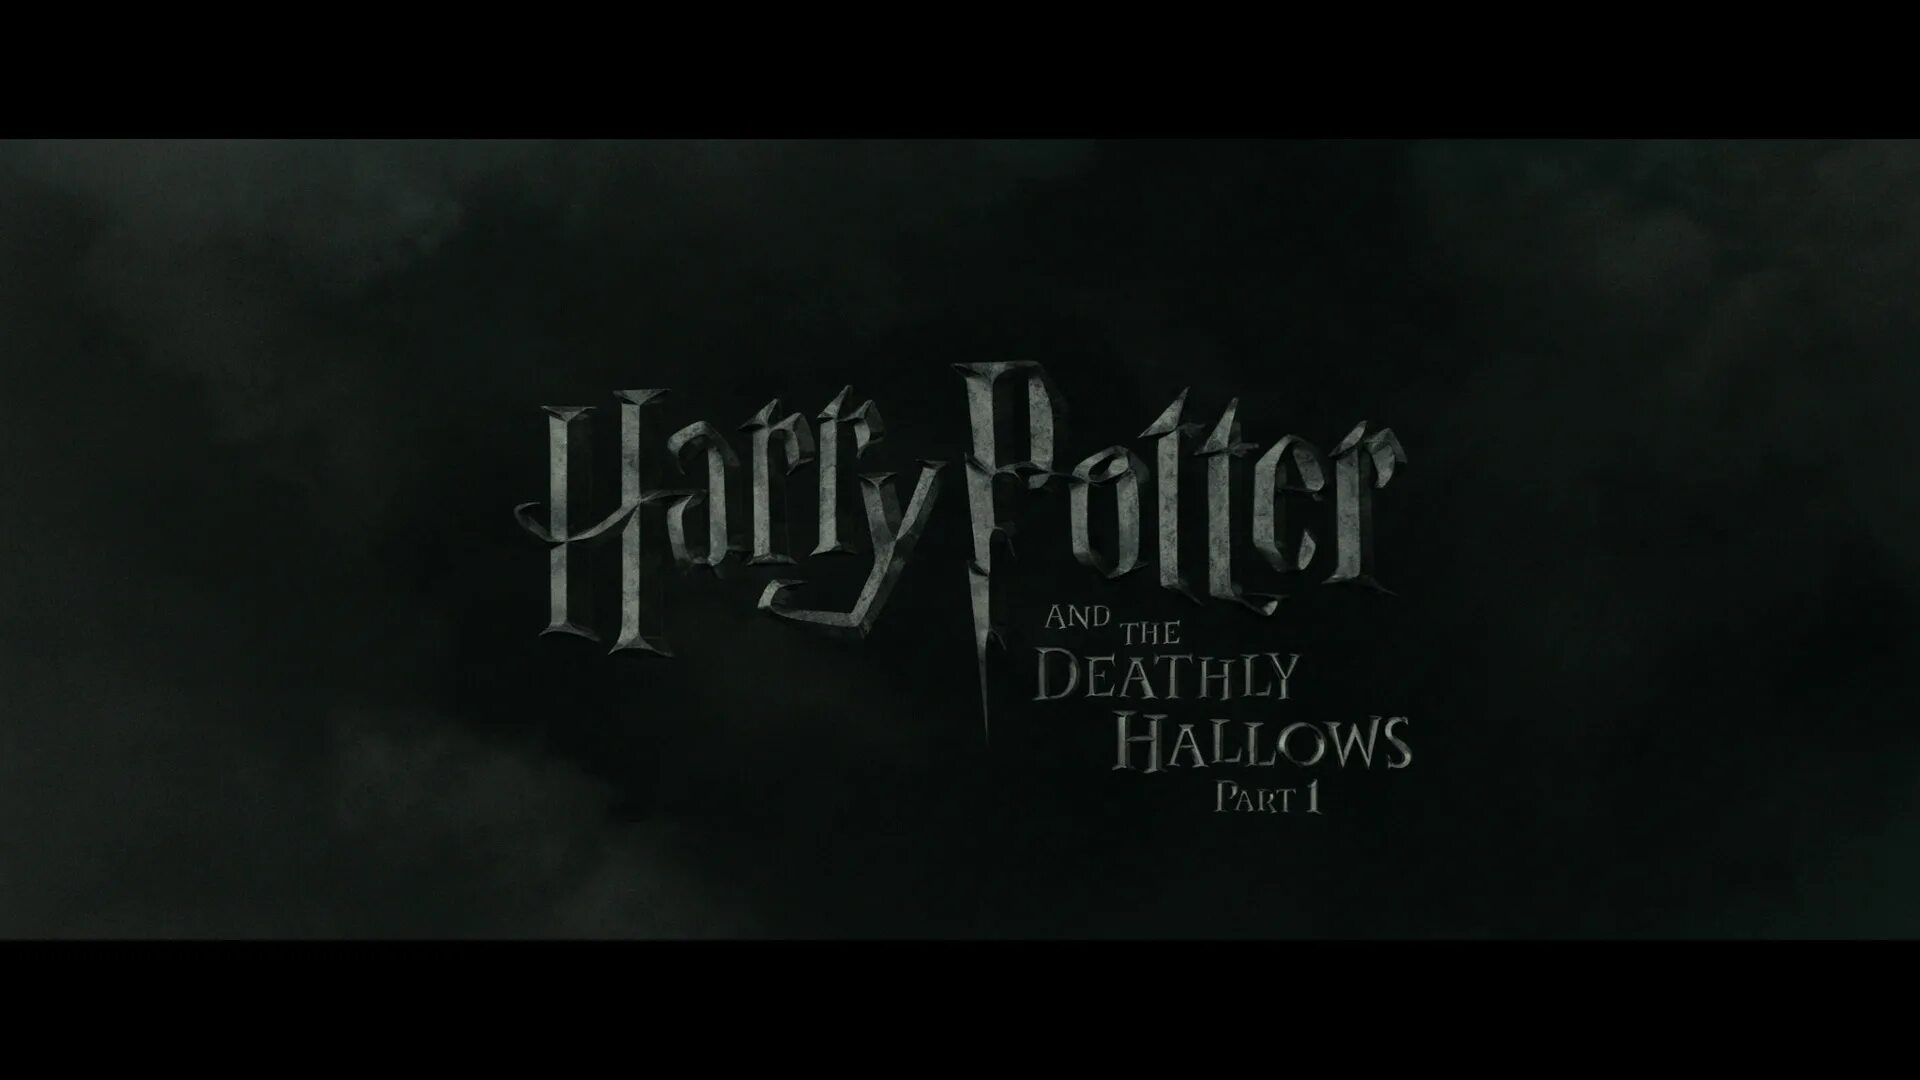 Harry Potter and the Deathly Hallows: Part 1 (2010). Harry Potter и дары смерти. Deathly hallow part 1